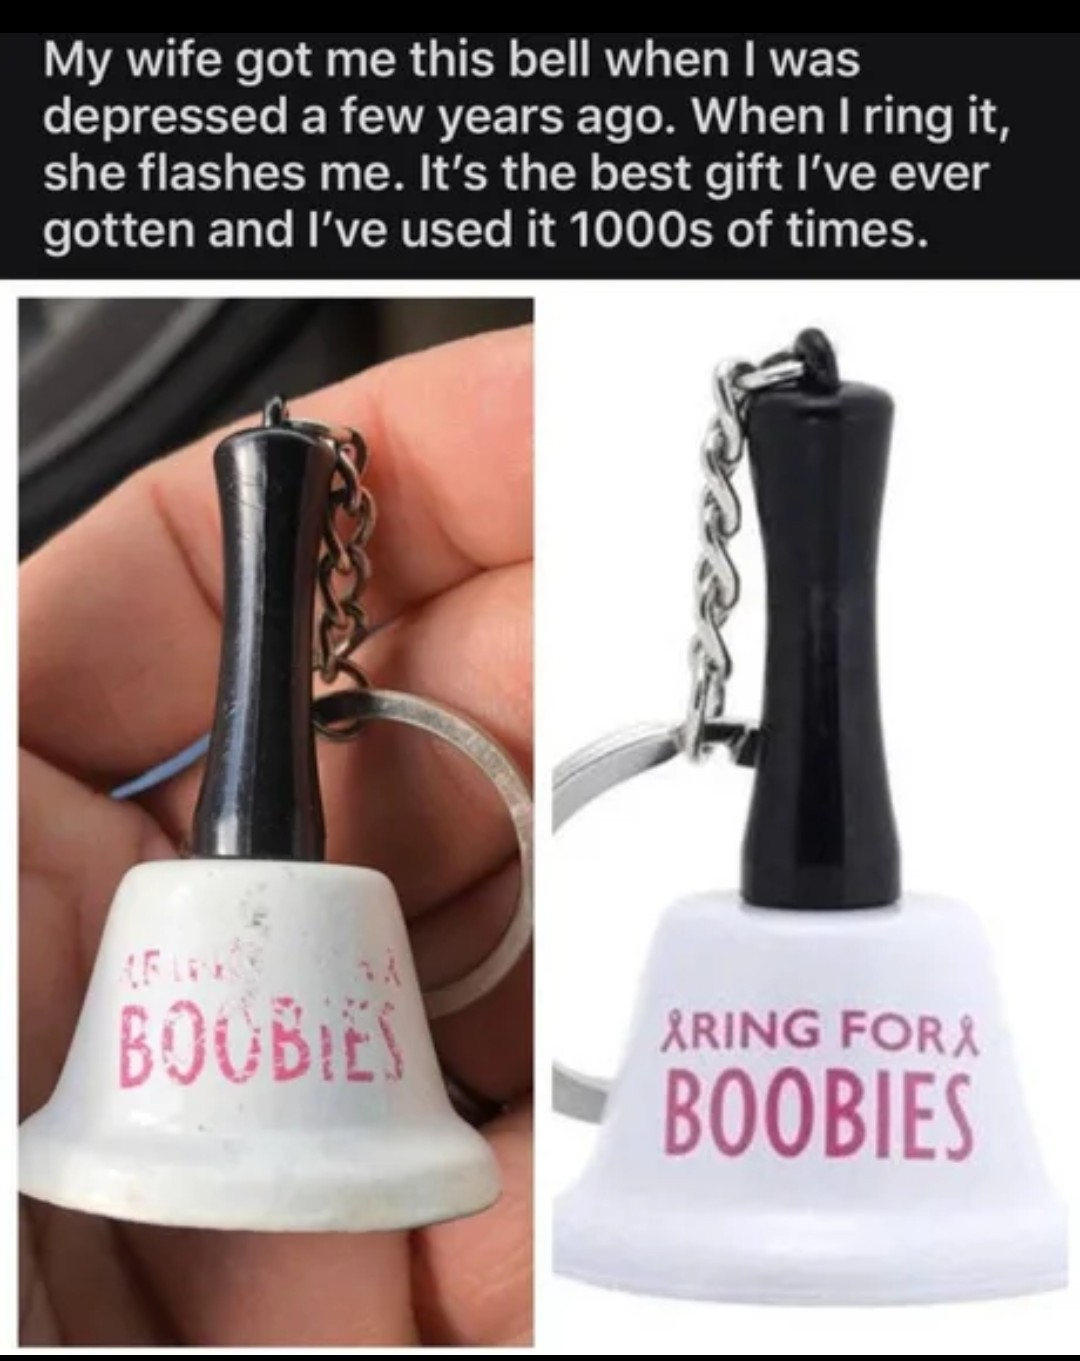 cosmetics - My wife got me this bell when I was depressed a few years ago. When I ring it, she flashes me. It's the best gift I've ever gotten and I've used it 1000s of times. Boubie Ring For Boobies